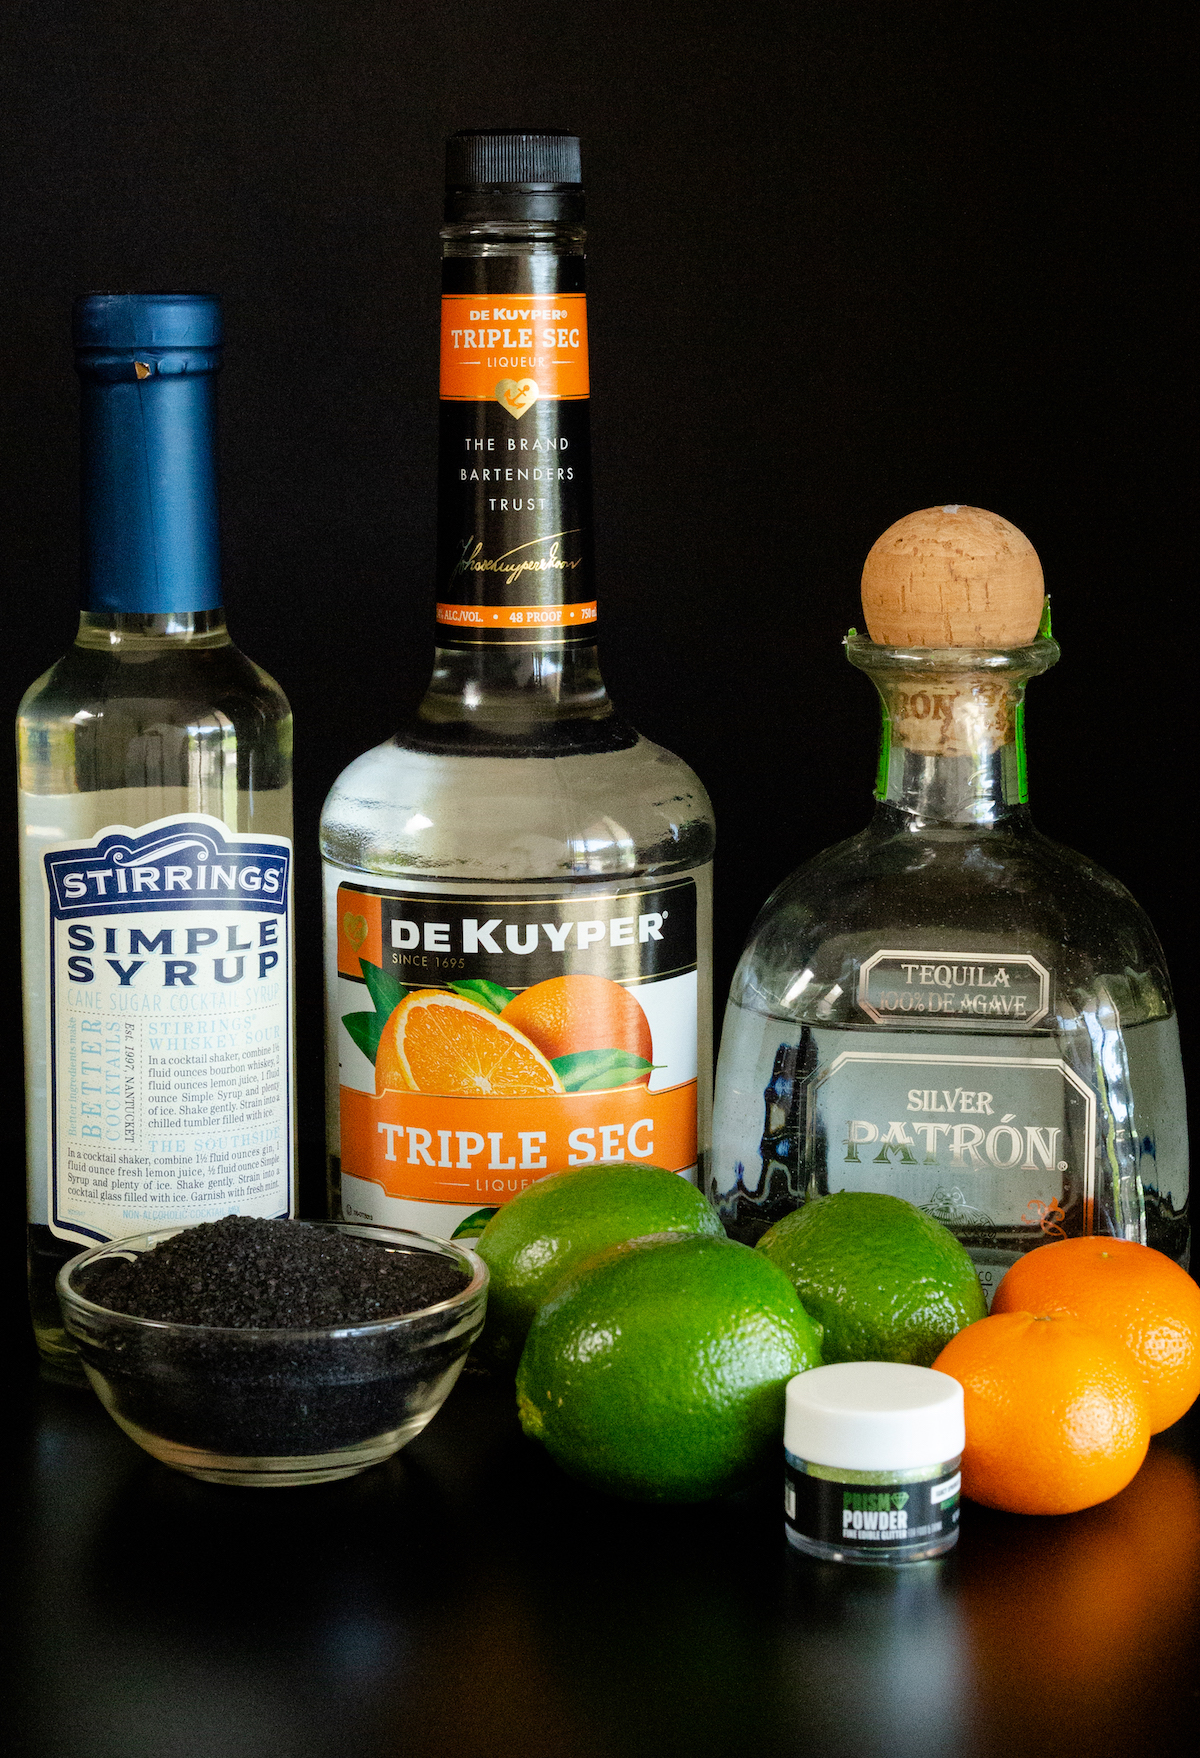 All the ingredients to make halloween margaritas sit on a black background. Simple syrup, triple sec, tequila, lava salt, limes, and small mandarin oranges.